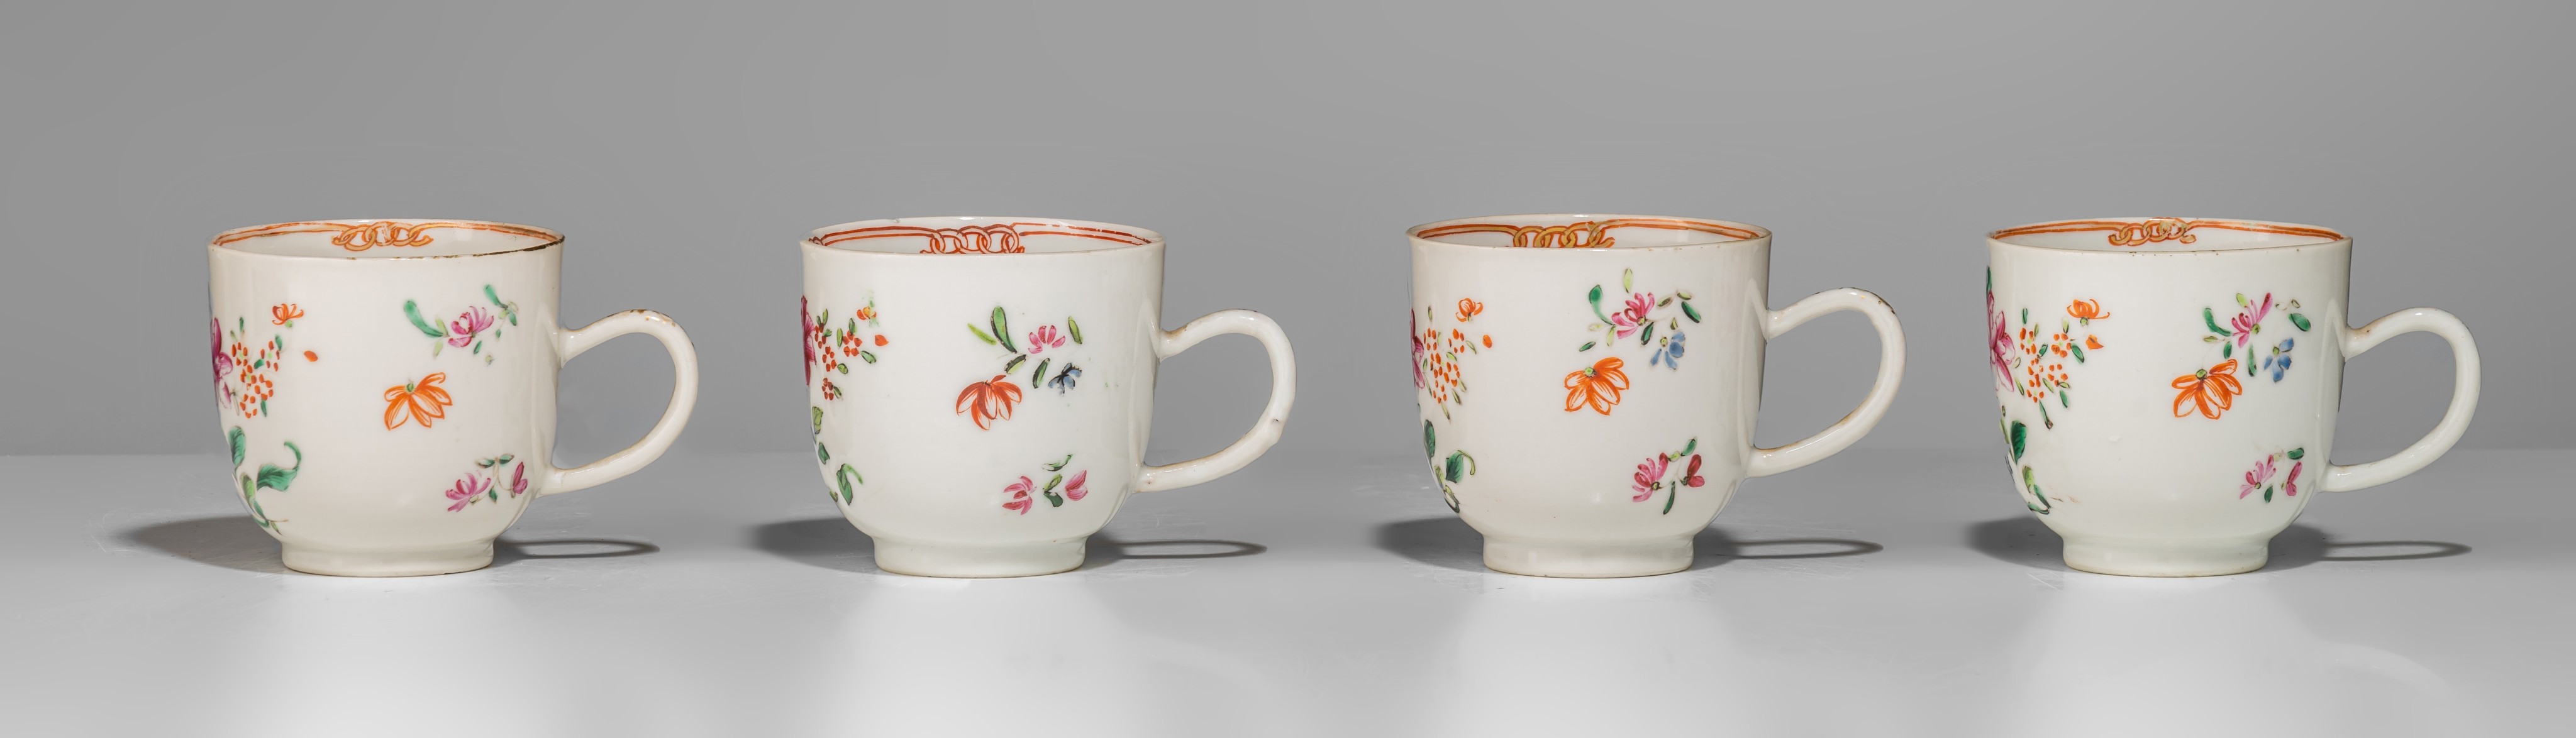 A collection of famille rose and gilt decorated export porcelain ware, 18thC, largest - H 12,5 - 34, - Image 17 of 20